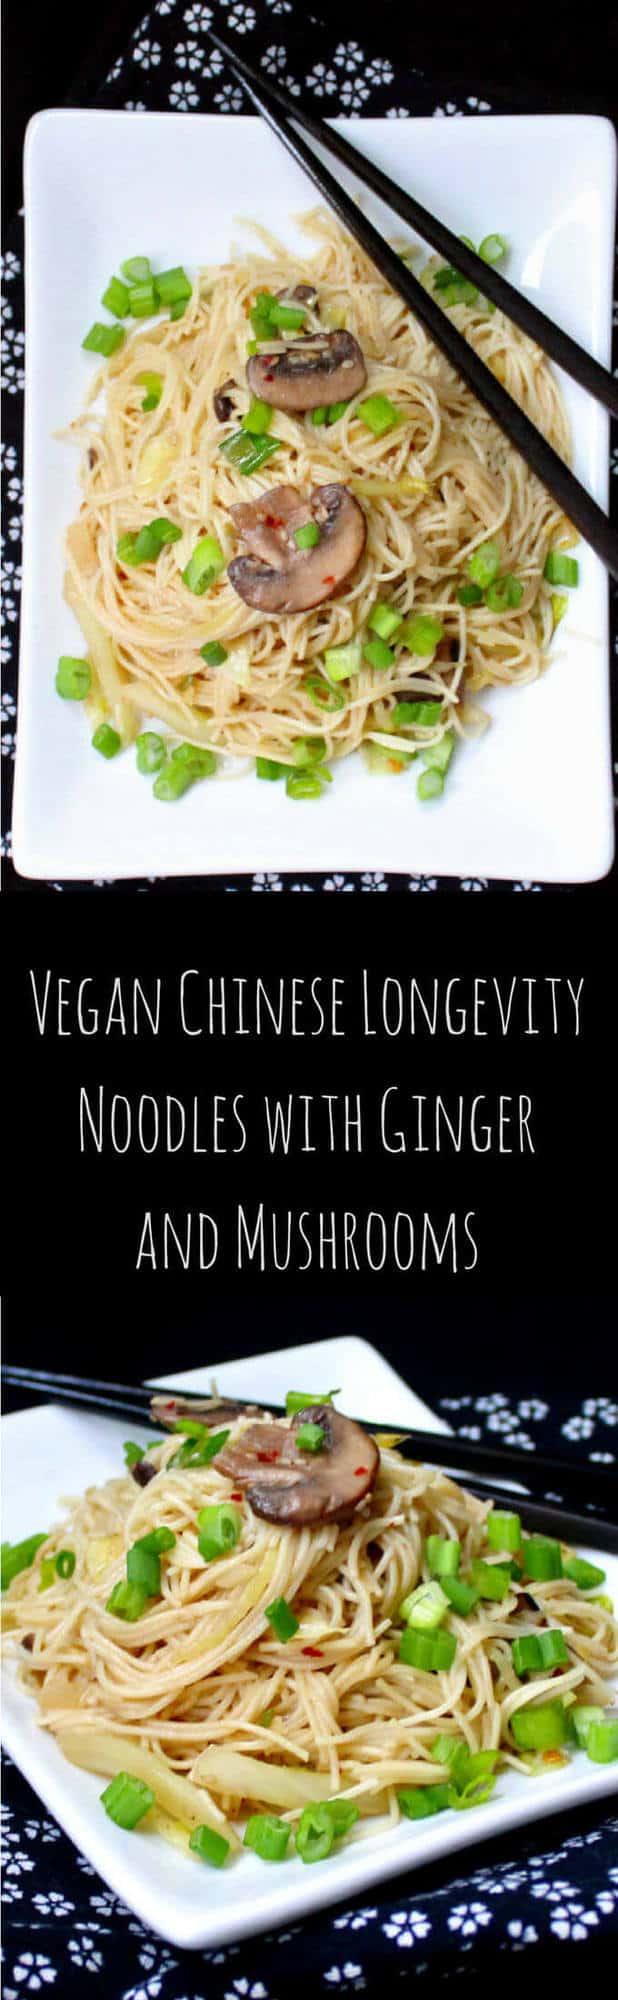 Vegan Chinese Longevity Noodles with Mushrooms and Ginger, yummy and delicious noodles that are perfect to ring in the Chinese new year or any time - HolyCowVegan.net